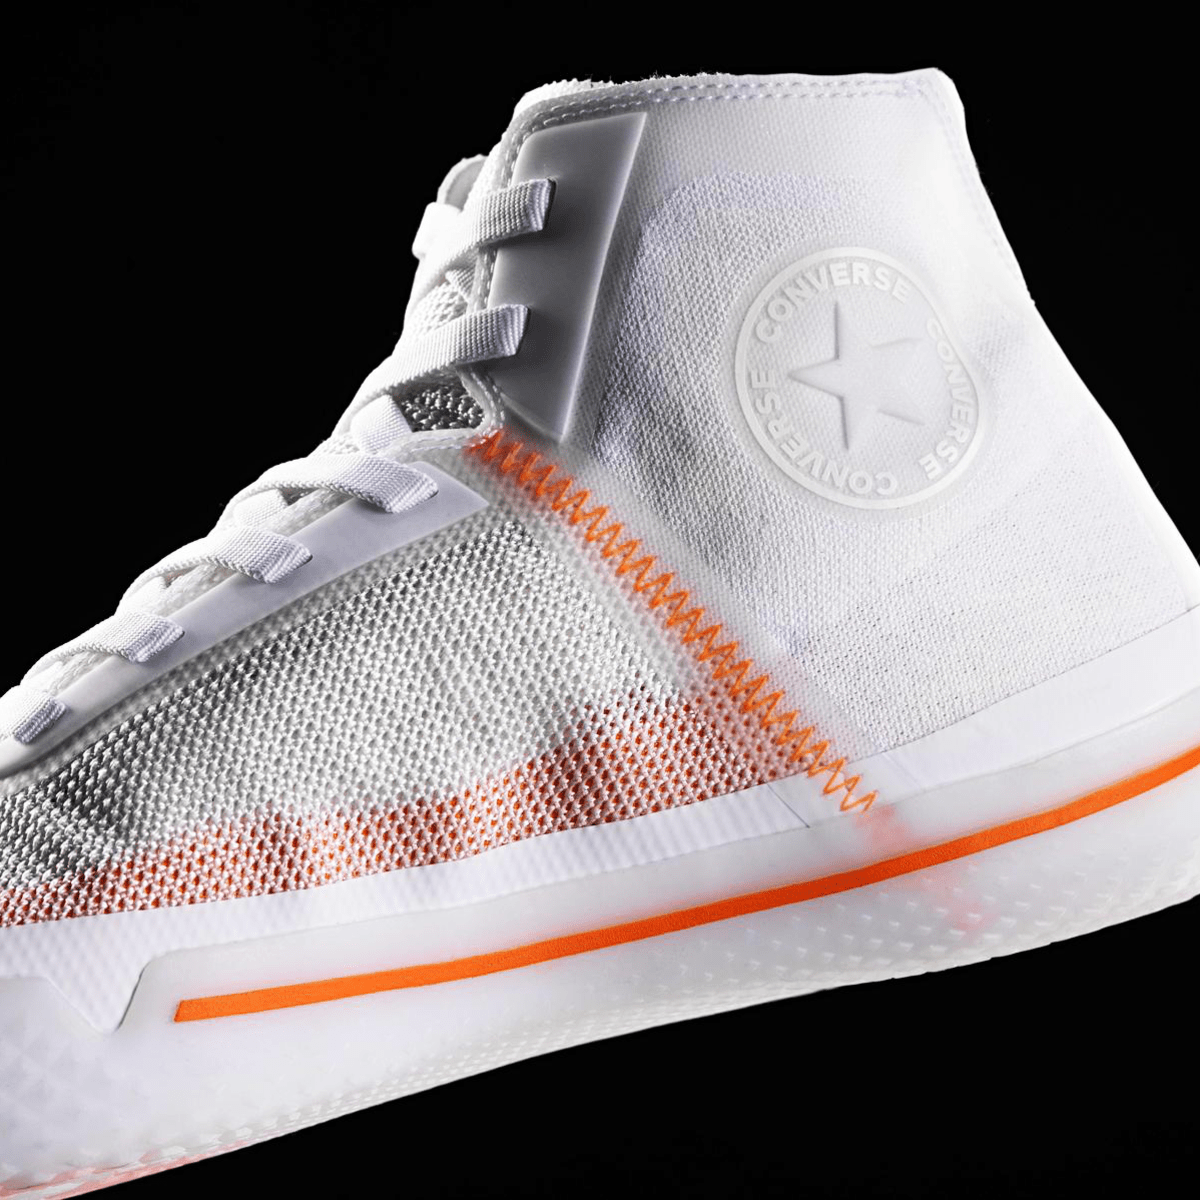 Converse Returns to Basketball With the Star Pro -